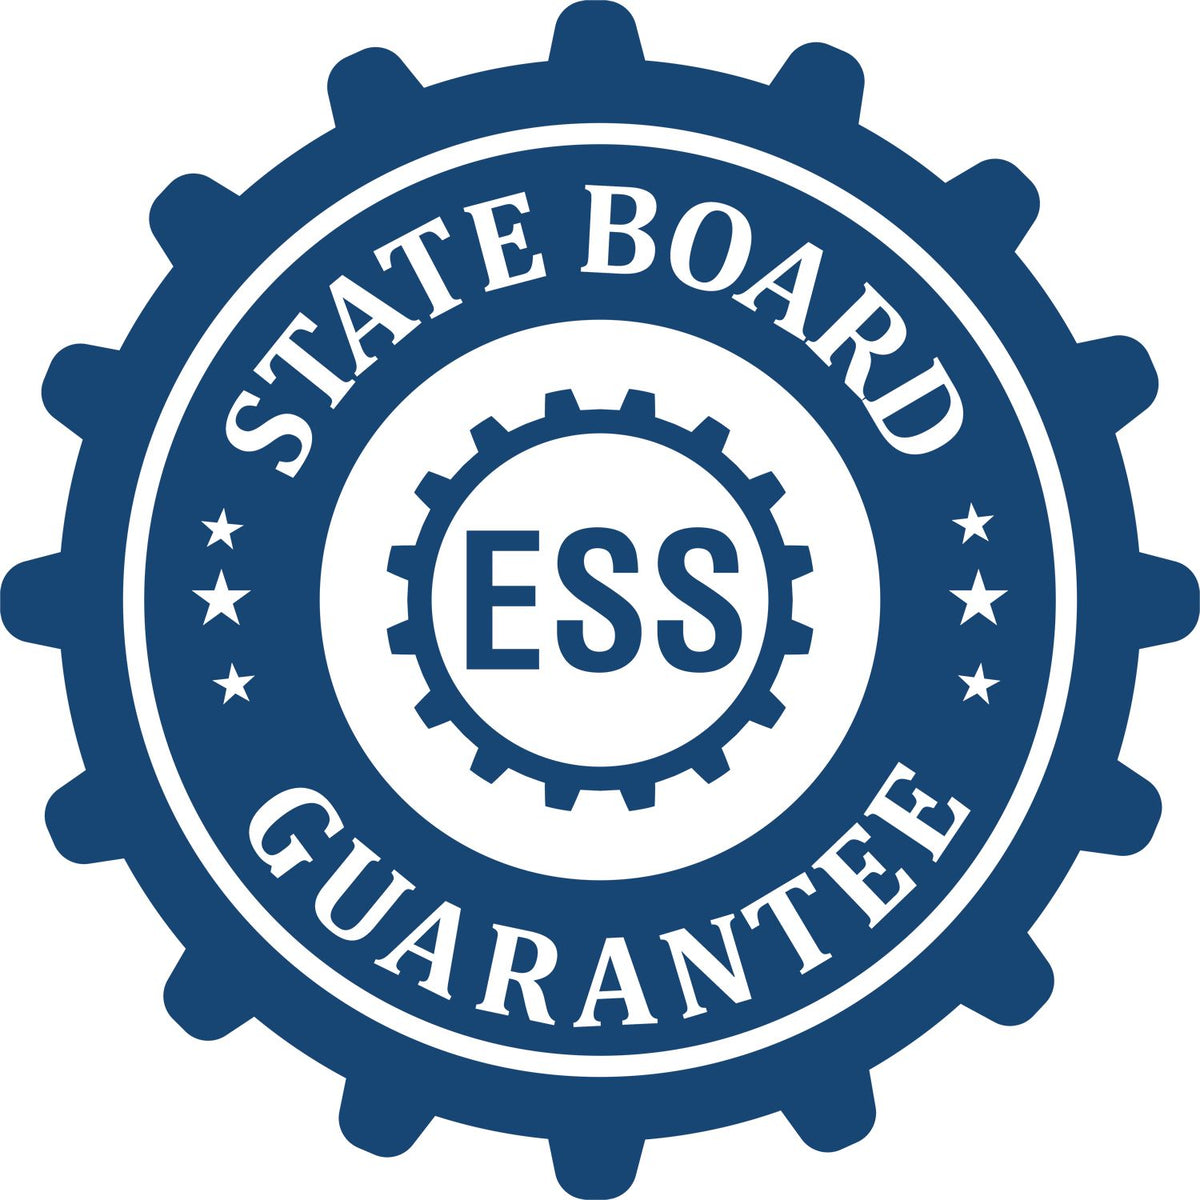 An emblem in a gear shape illustrating a state board guarantee for the Hybrid Michigan Geologist Seal